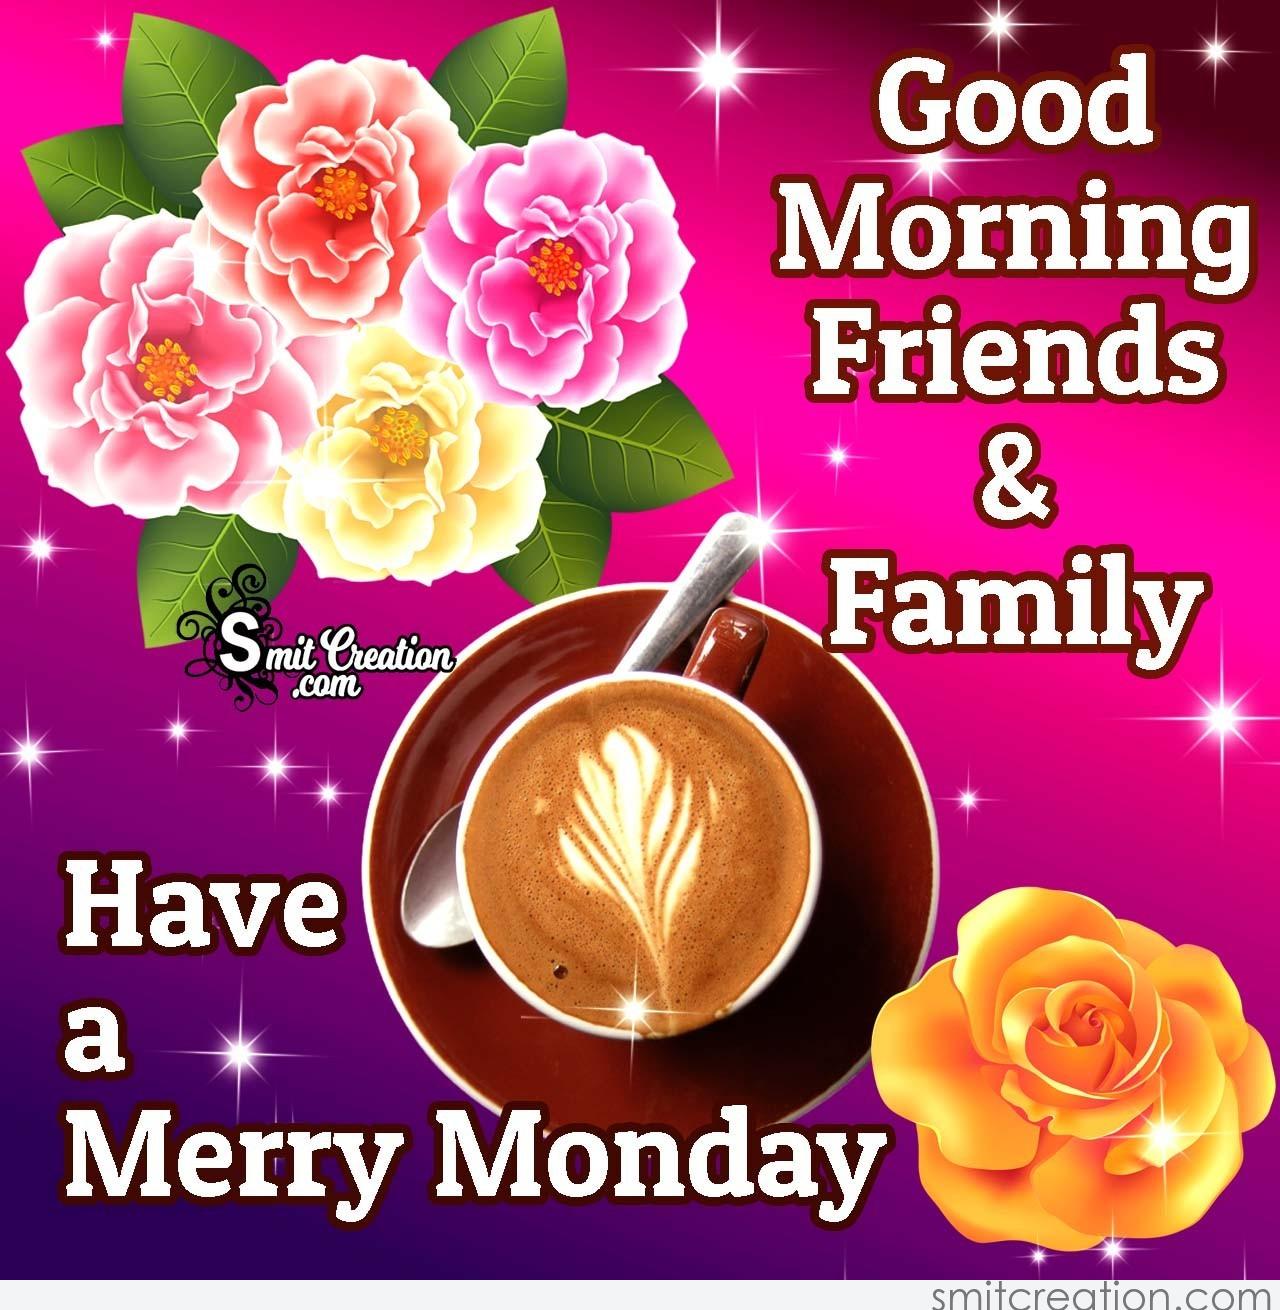 Good Morning Friends & Family Have A Merry Monday - SmitCreation.com